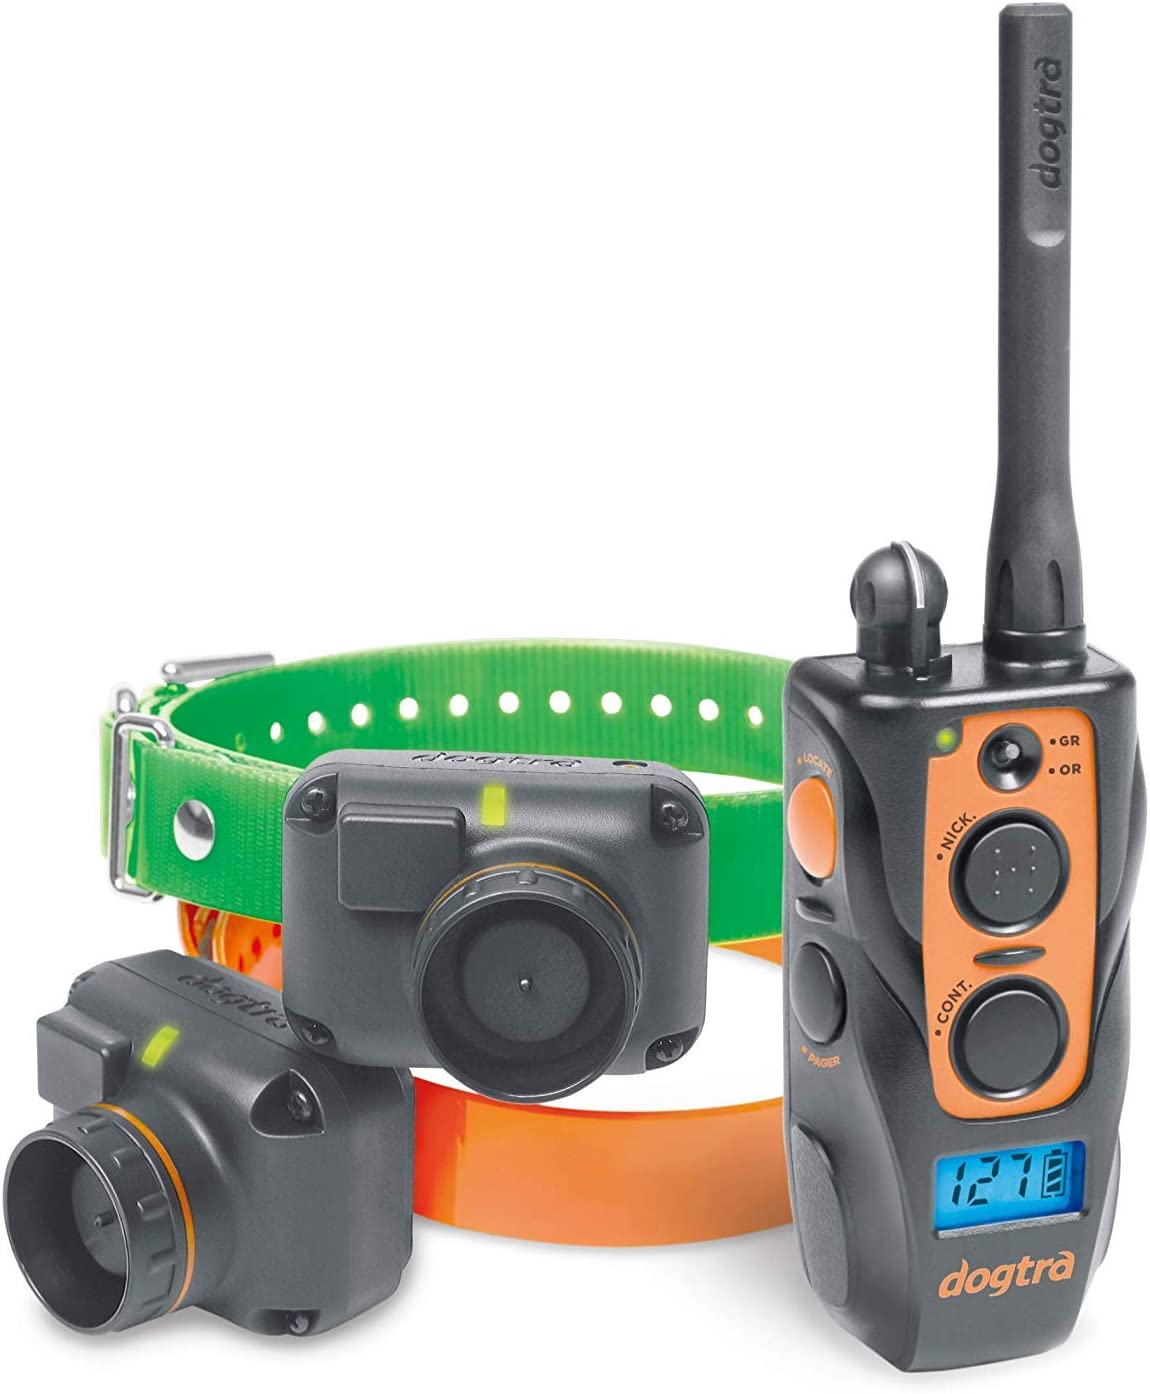 Dogtra 2702T&B Two Dogs Remote Training and Beeper Collar - 1 Mile Range, Rechargeable, Waterproof - Plus 1 iClick Training Card, Jestik Click Trainer - Value Bundle